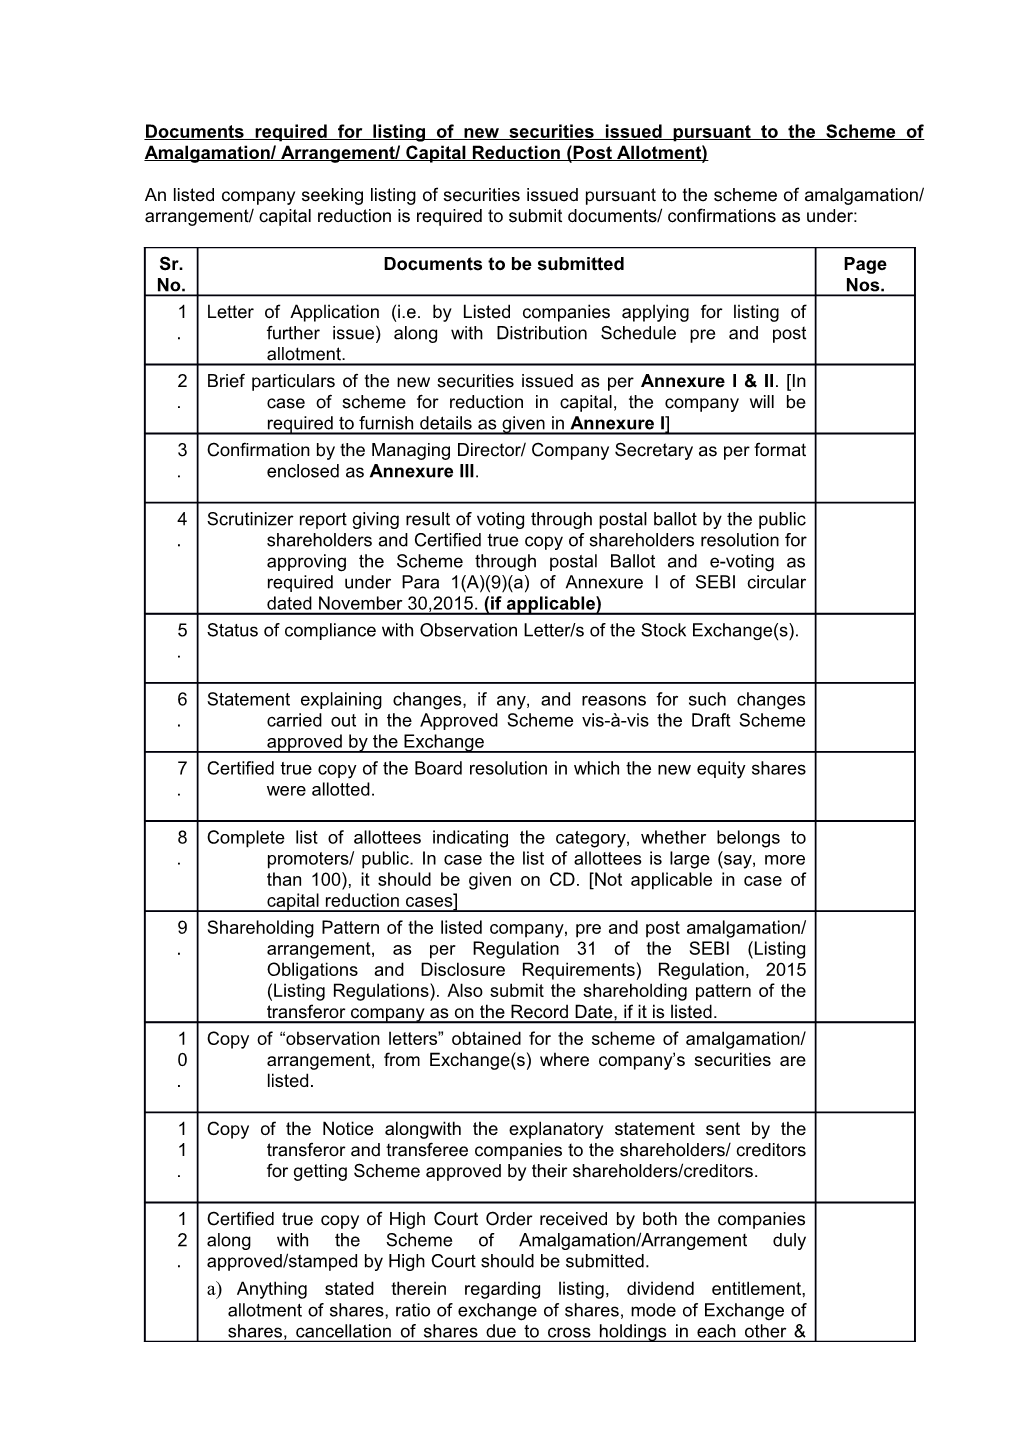 Documents Required for Listing of New Securities Issued Pursuant to the Scheme of Amalgamation